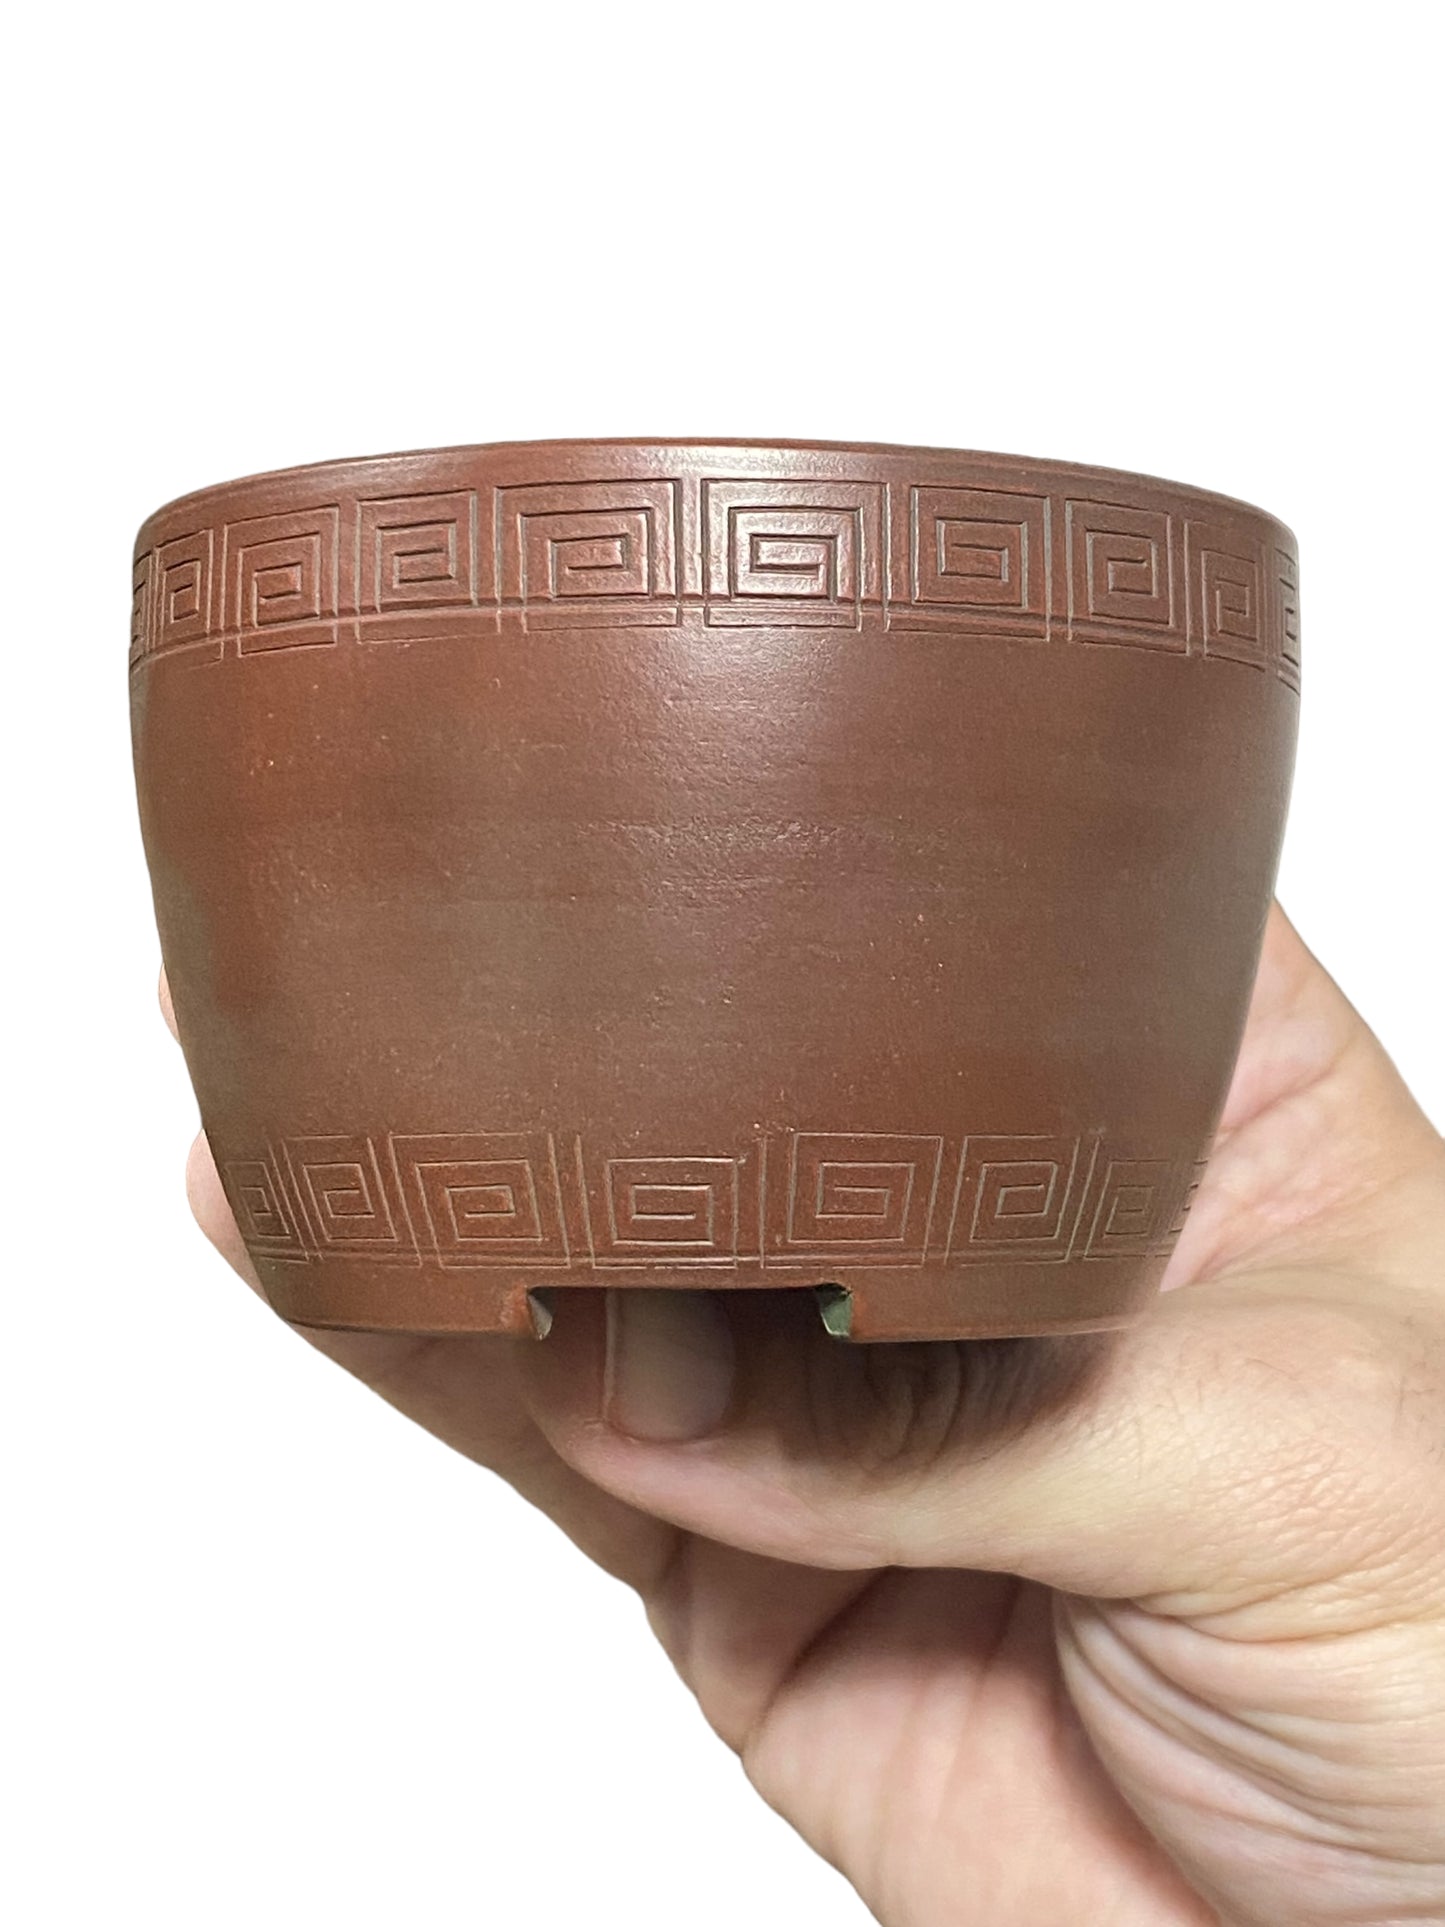 Bigei - Classic Carved Bowl Style Bonsai or Accent Pot